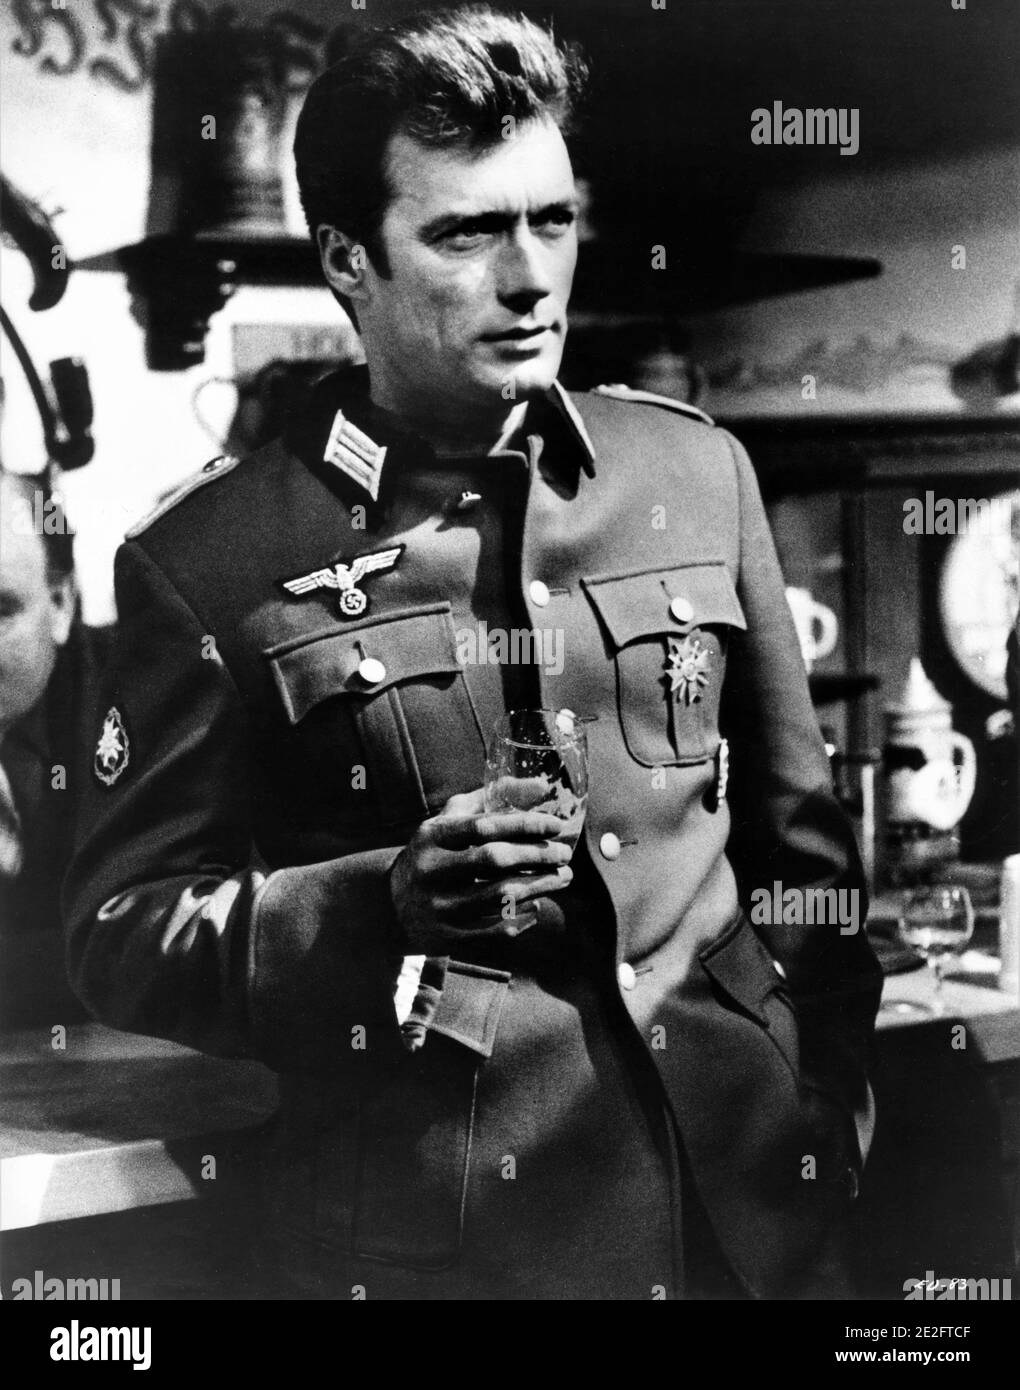 CLINT EASTWOOD in Nazi Uniform at Bar in WHERE EAGLES DARE 1968 director BRIAN G. HUTTON story / screenplay Alistair MacLean music Ron Goodwin producers Elliot Kastner and Jerry Gershwin  Gershwin-Kastner Productions / Winkast Film Productions / Metro Goldwyn Mayer Stock Photo